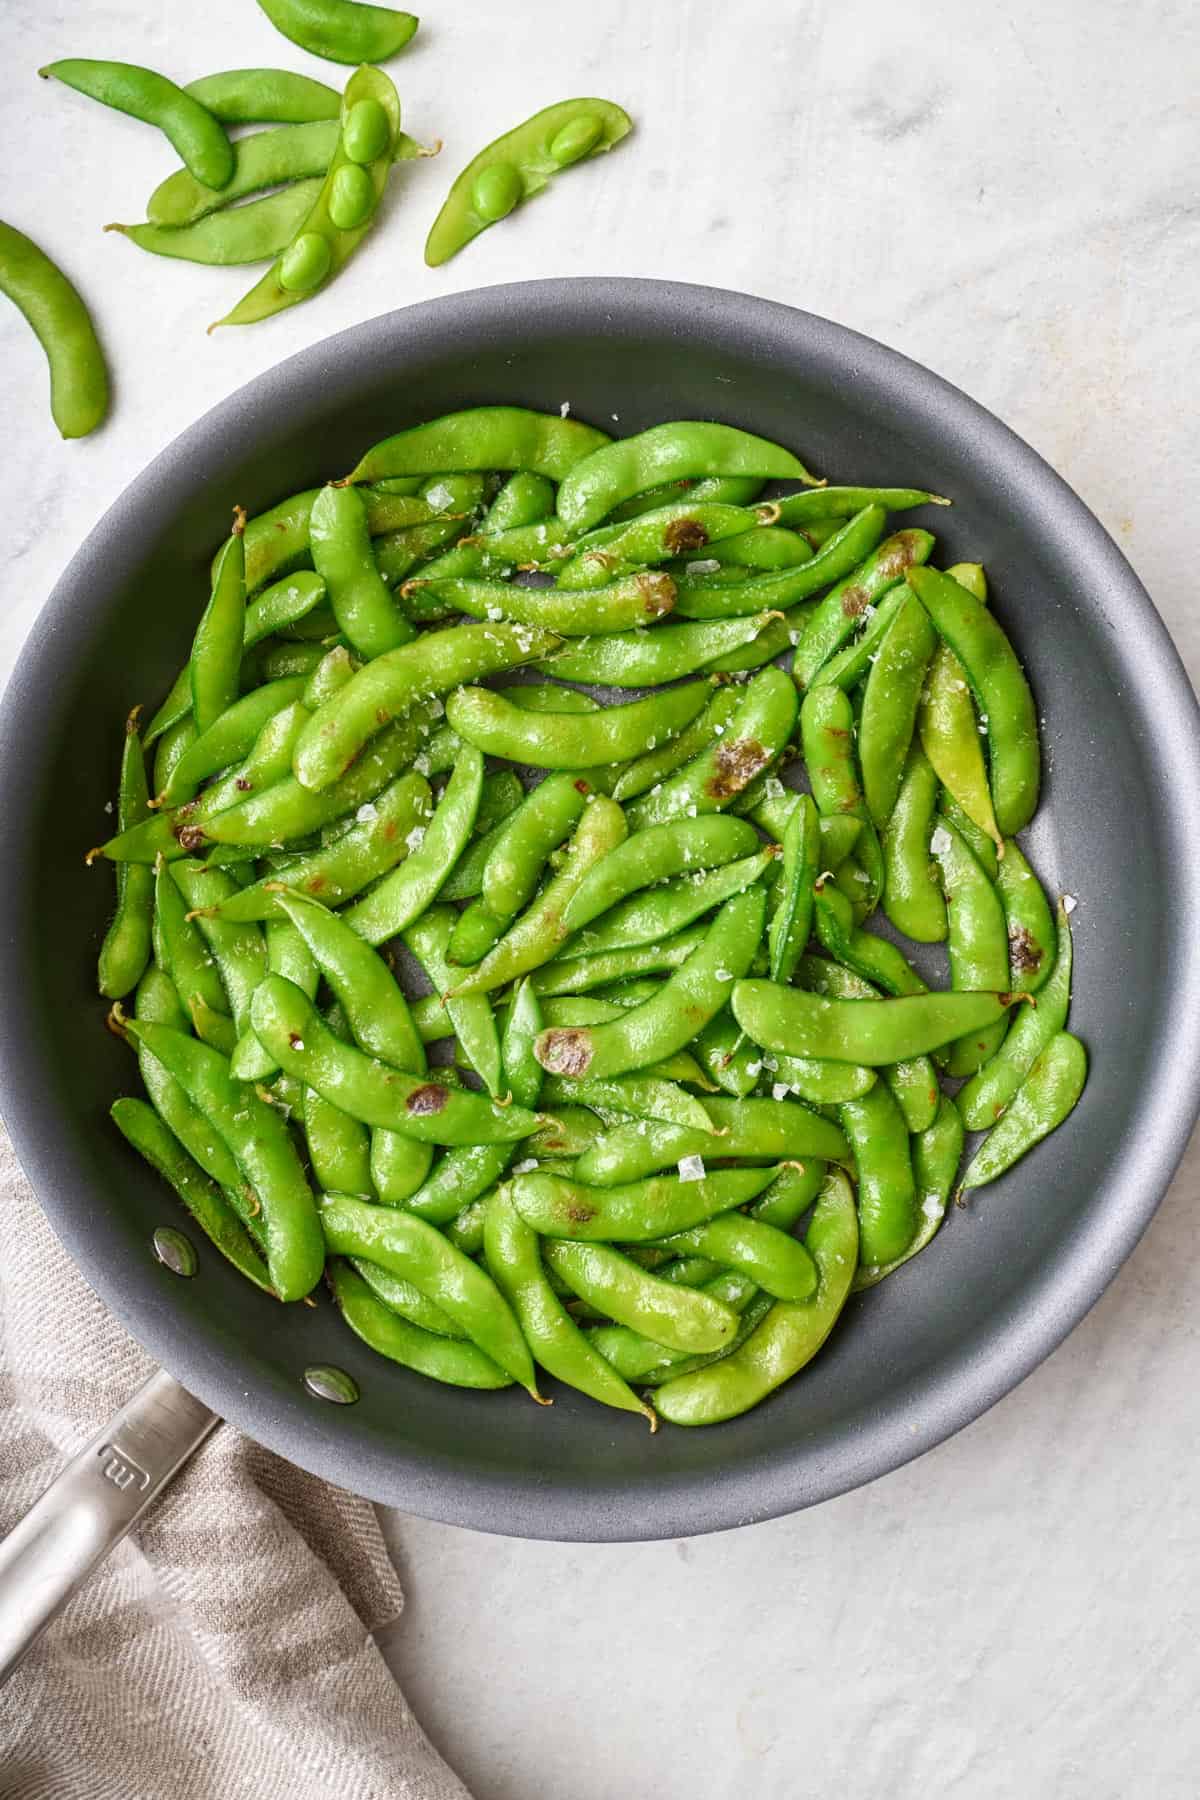 Pan-seared whole edamame pods in a skillet, garnished with flaky sea salt.